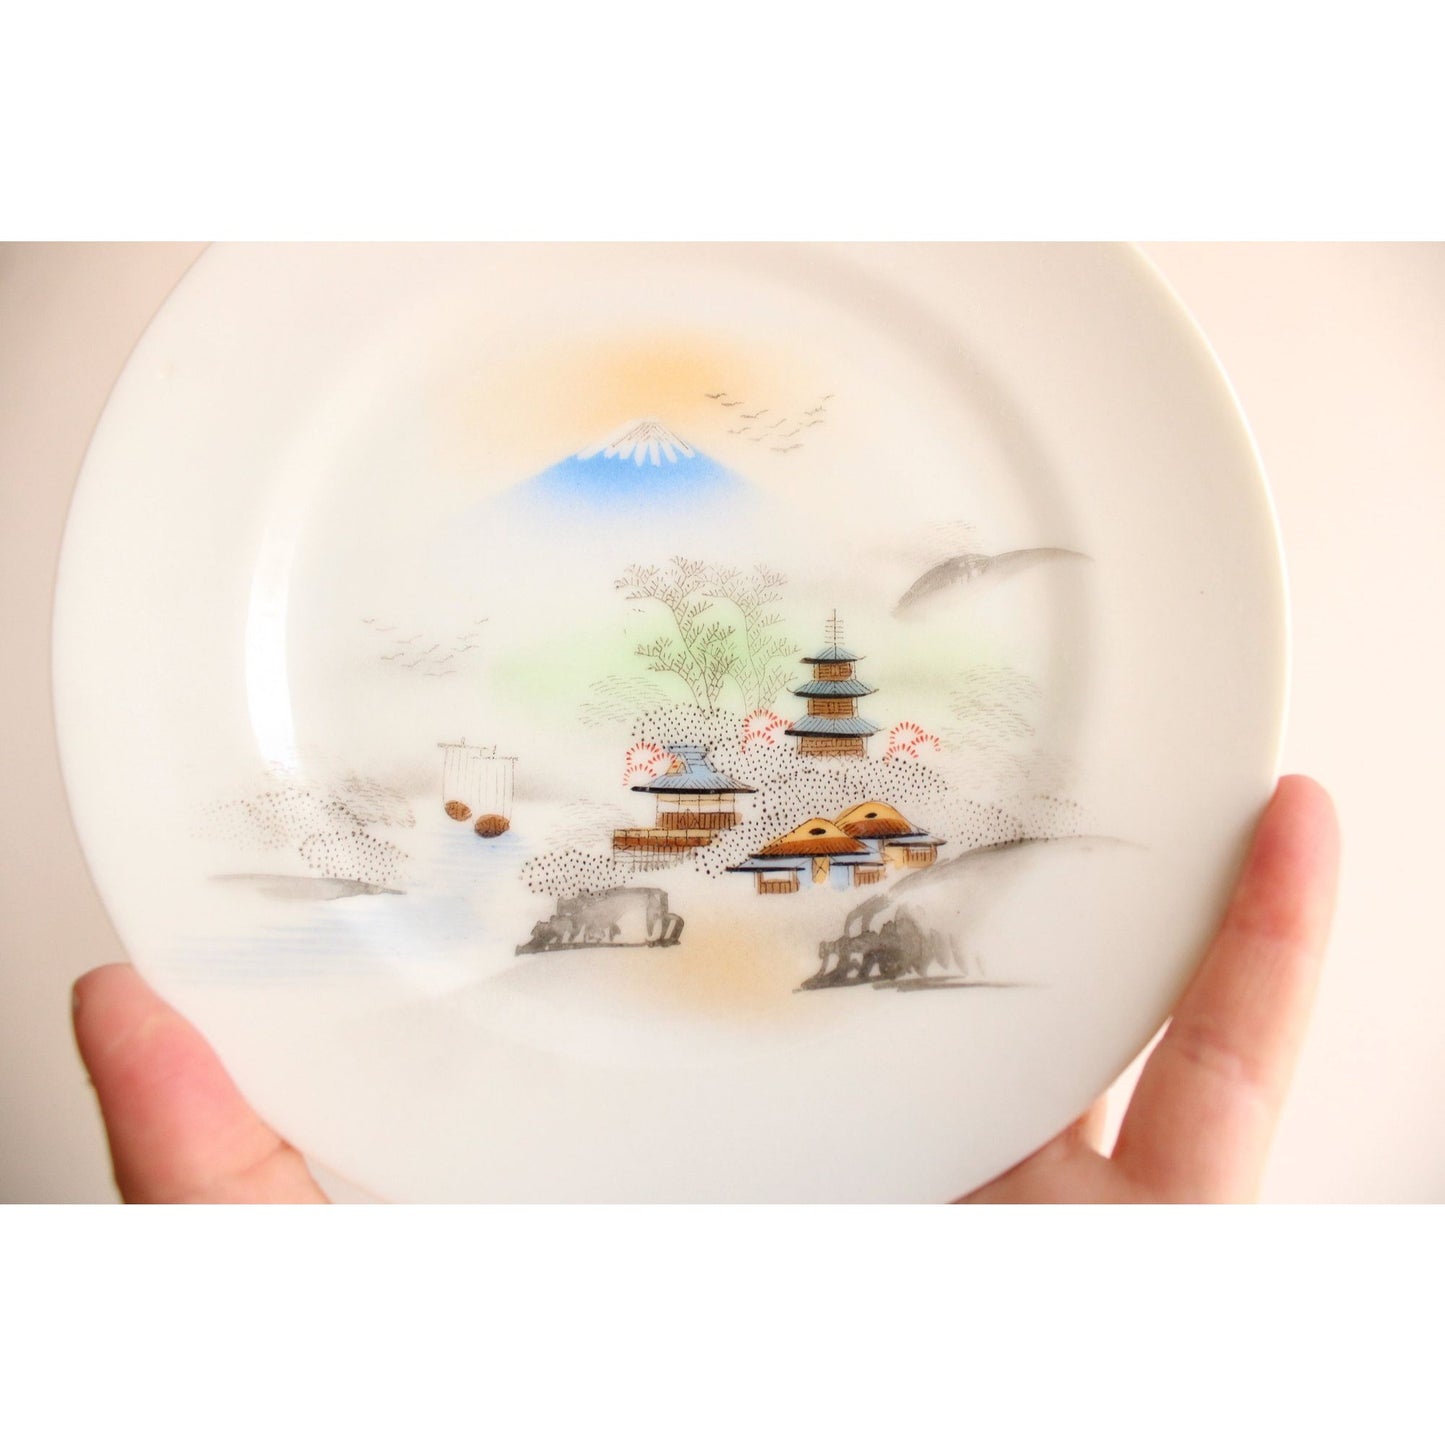 Vintage Hand Painted Small Dessert Plate With A Landscape Pattern